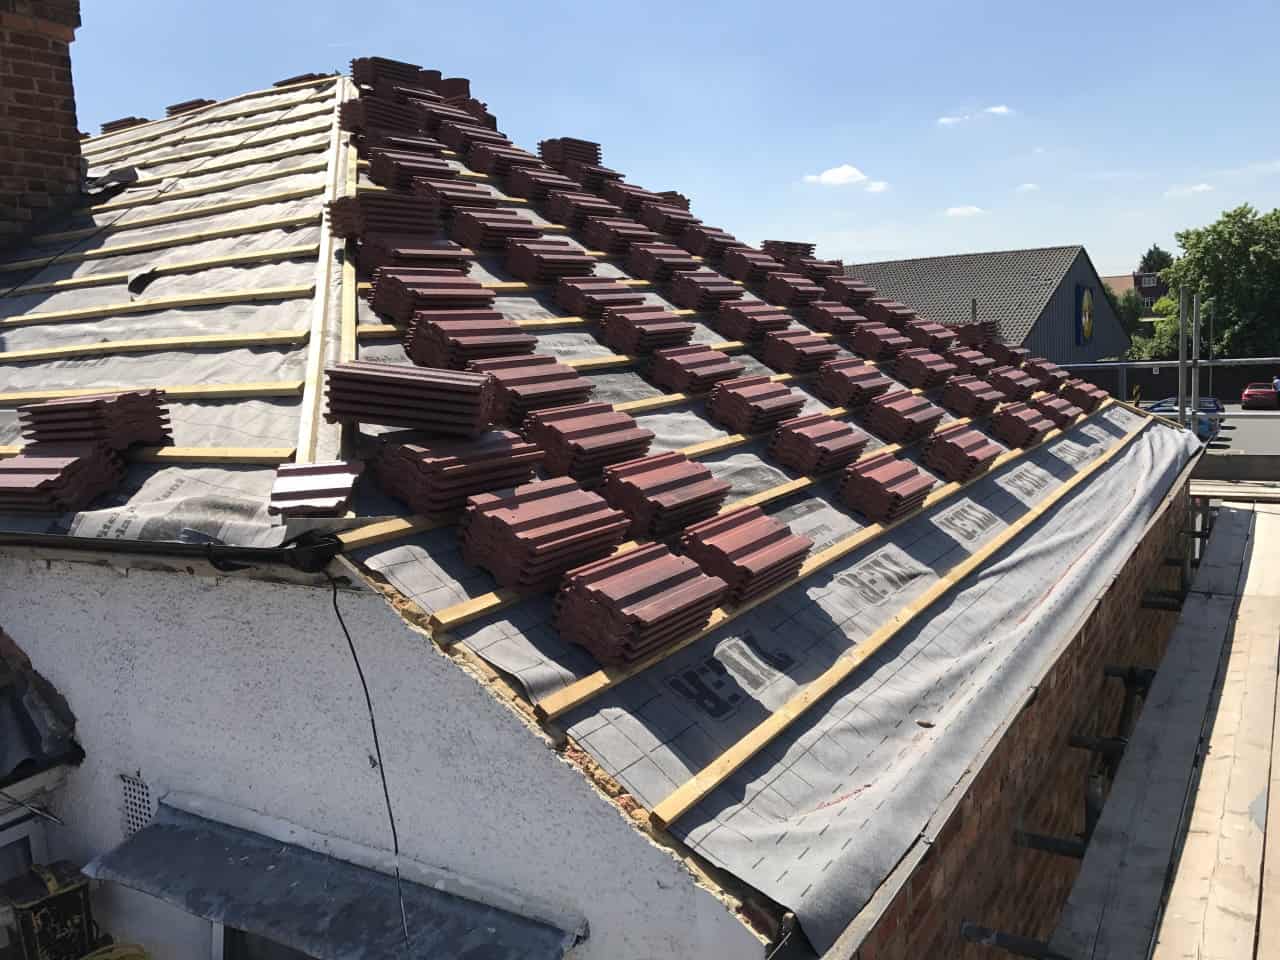 Clayridge Roofing Contractors in Croydon, Surrey and South London